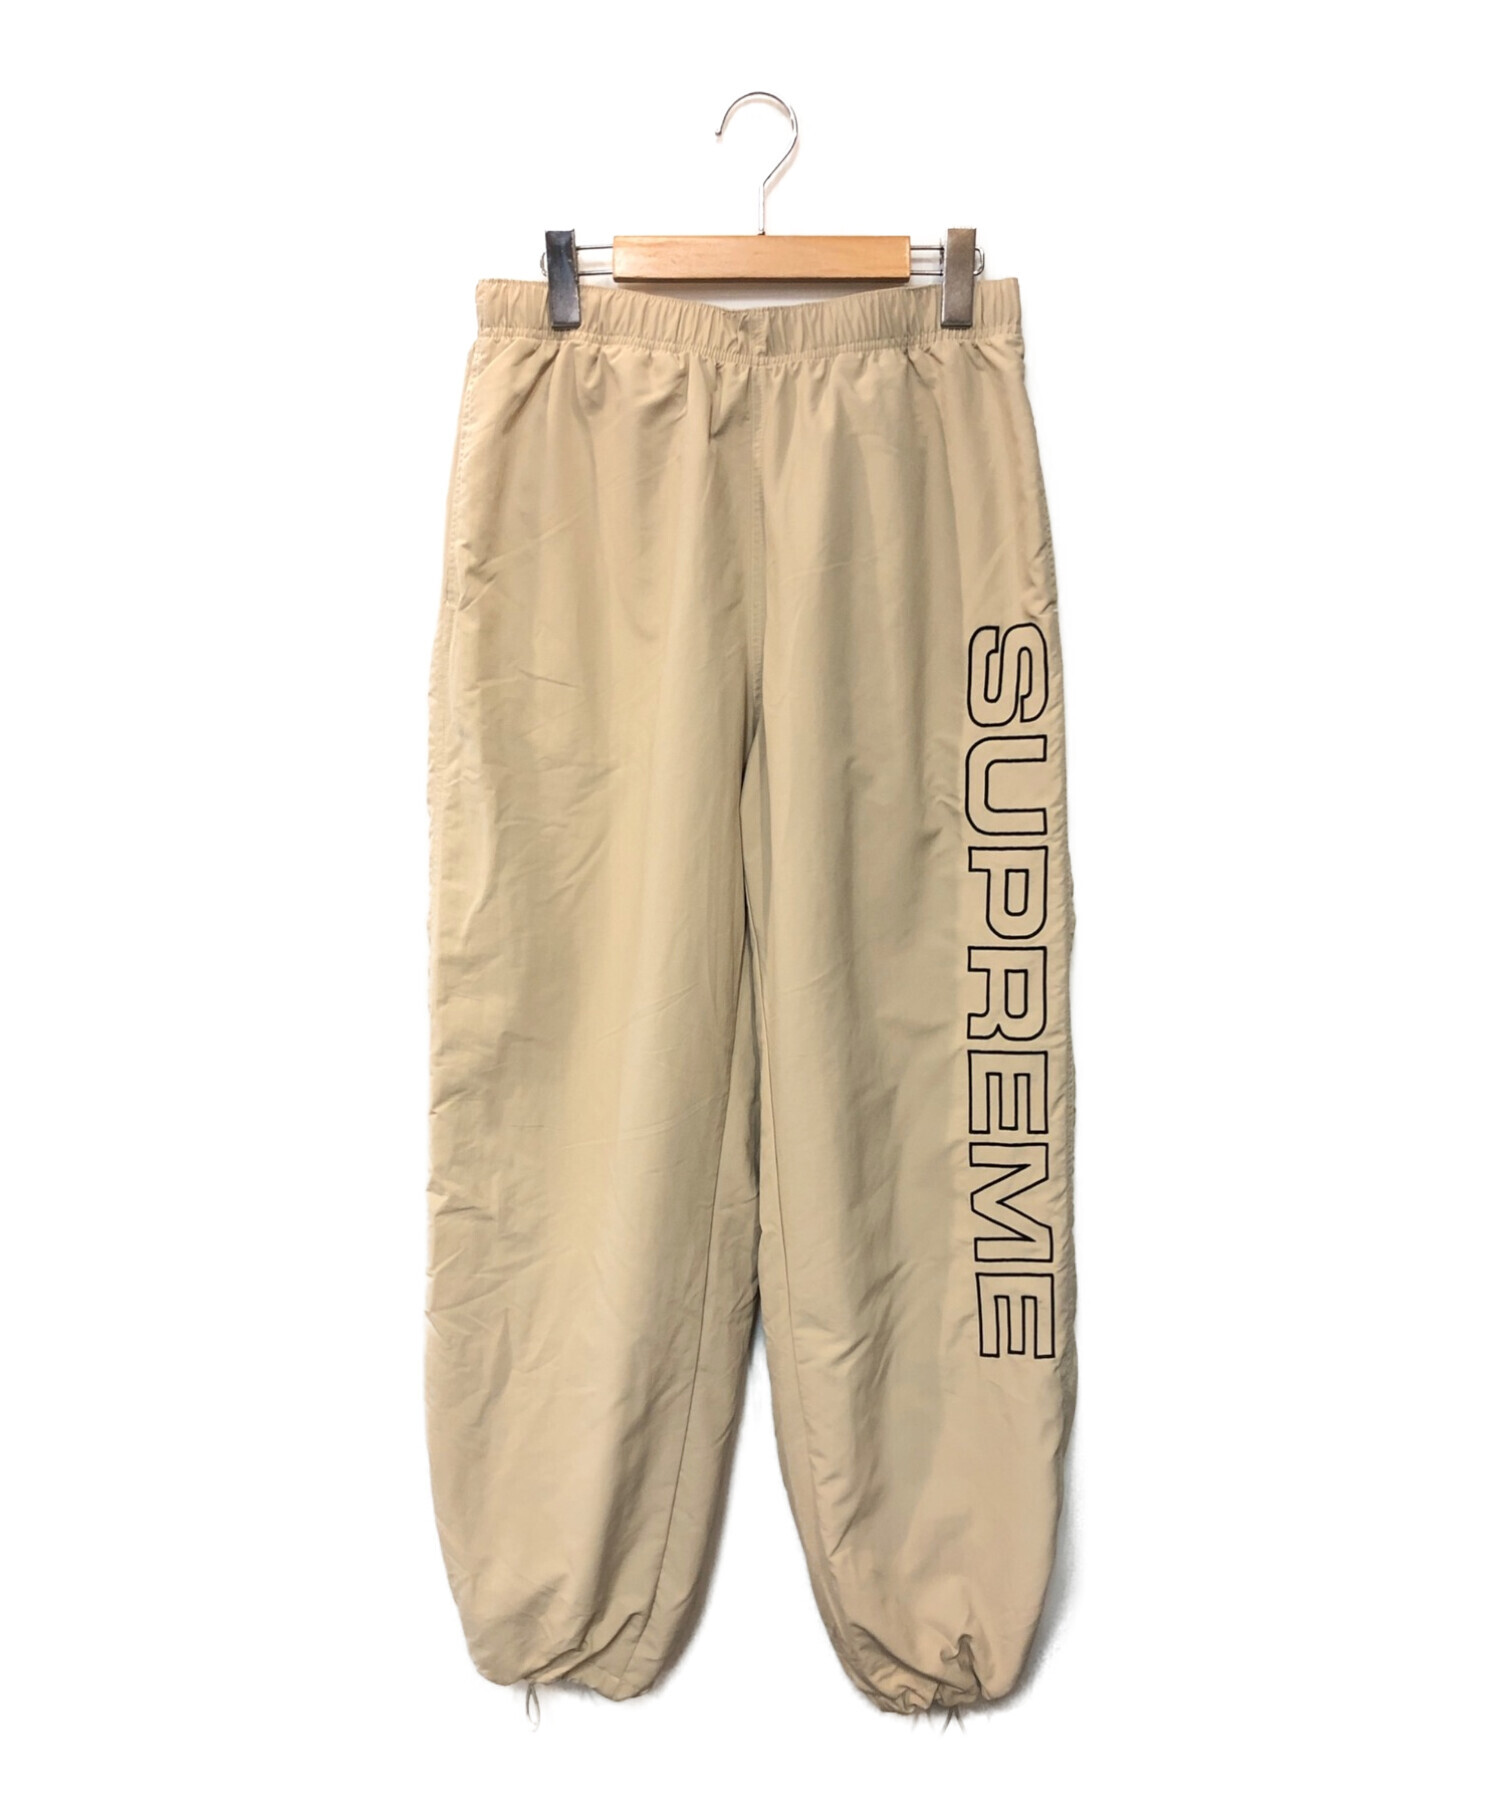 MediumSupreme Spellout Embroidered Track Pant